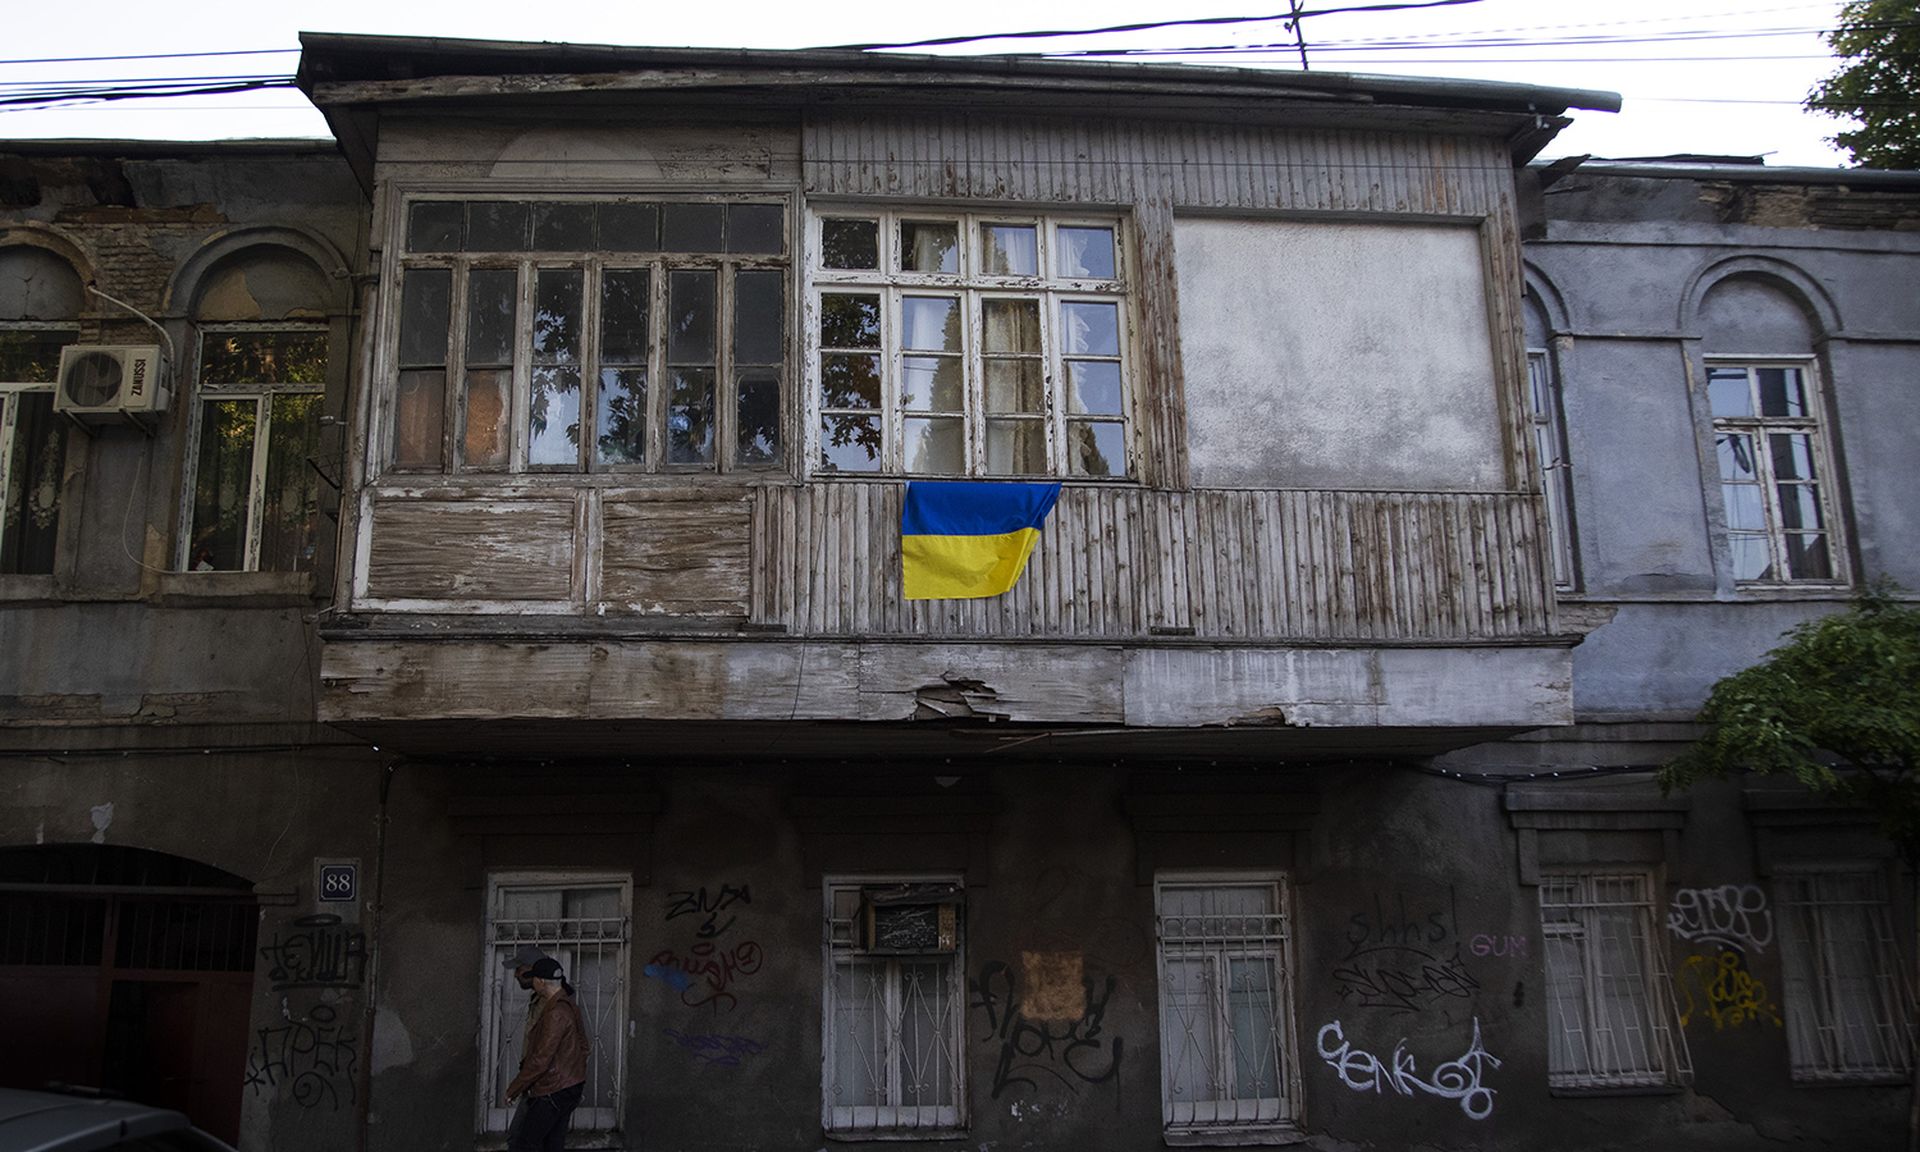 Identity issues become a problem for refugees displaced by conflict, such as those fleeing Ukraine during the Russian invasion. Pictured: Ukrainian flags are displayed in various locations around Tbilisi, Georgia, to show support for Ukraine on May 21, 2022. (Photo by Daro Sulakauri/Getty Images)